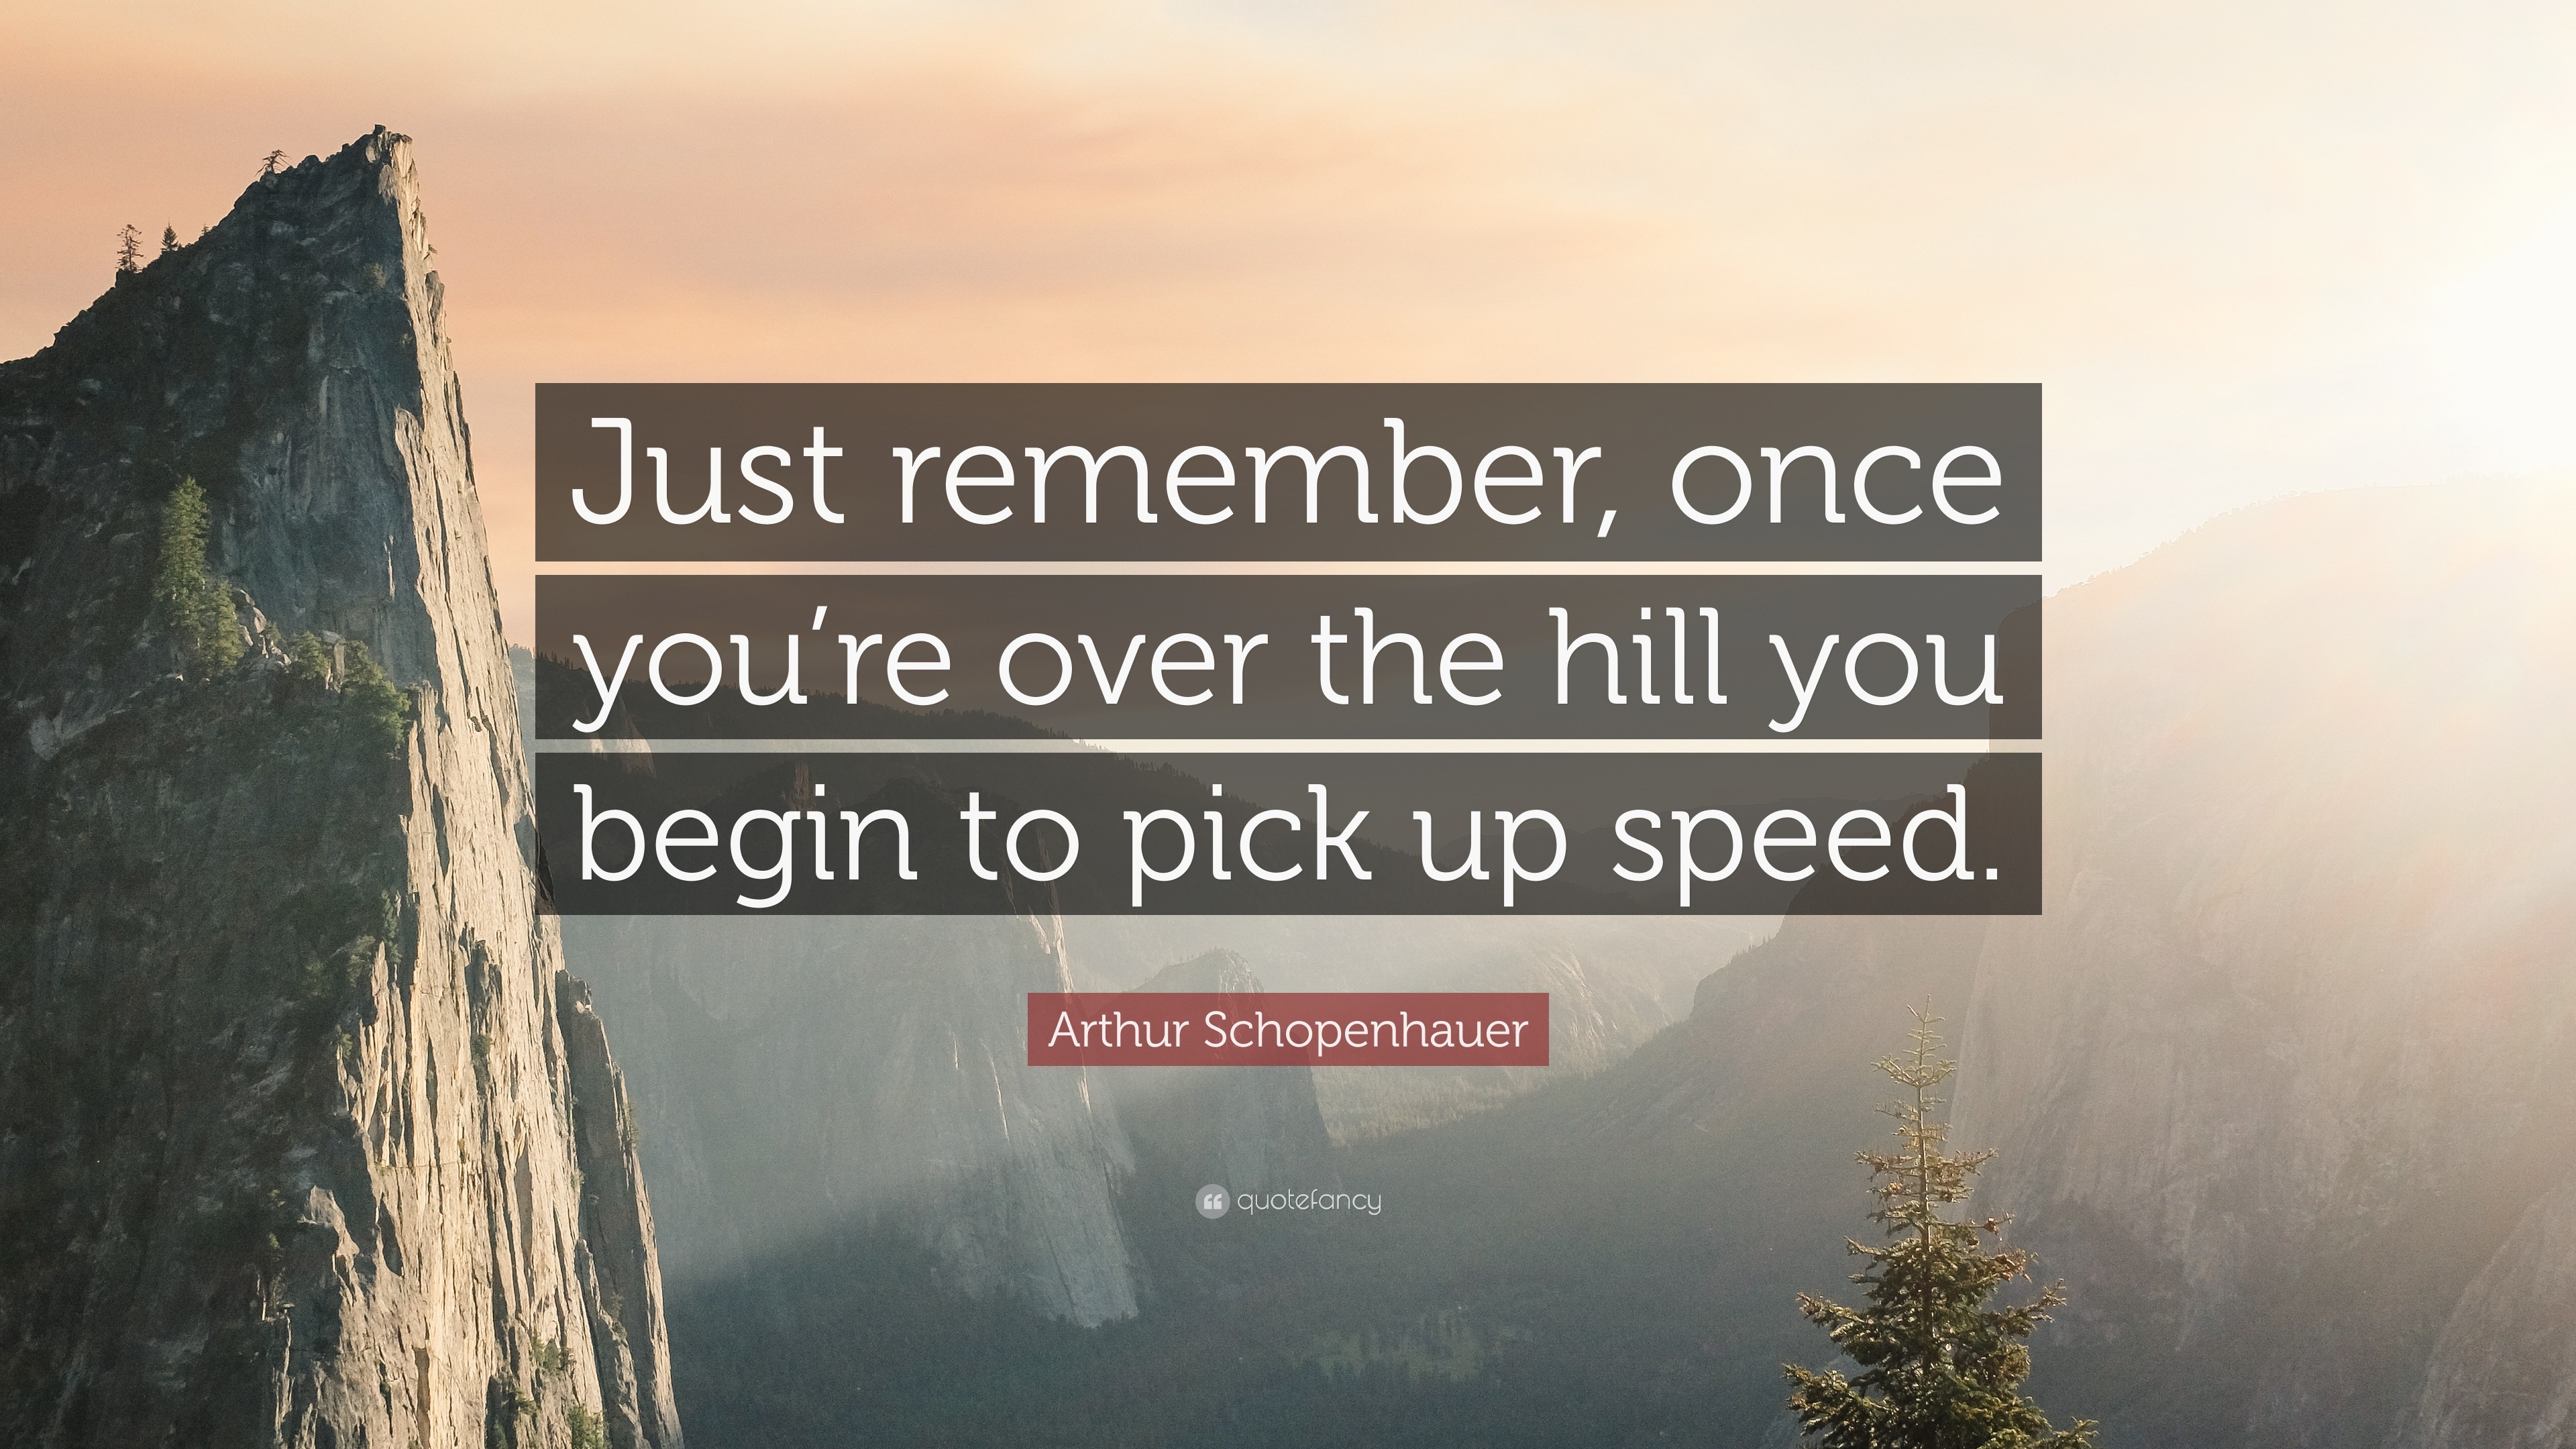 https://quotefancy.com/media/wallpaper/3840x2160/41711-Arthur-Schopenhauer-Quote-Just-remember-once-you-re-over-the-hill.jpg